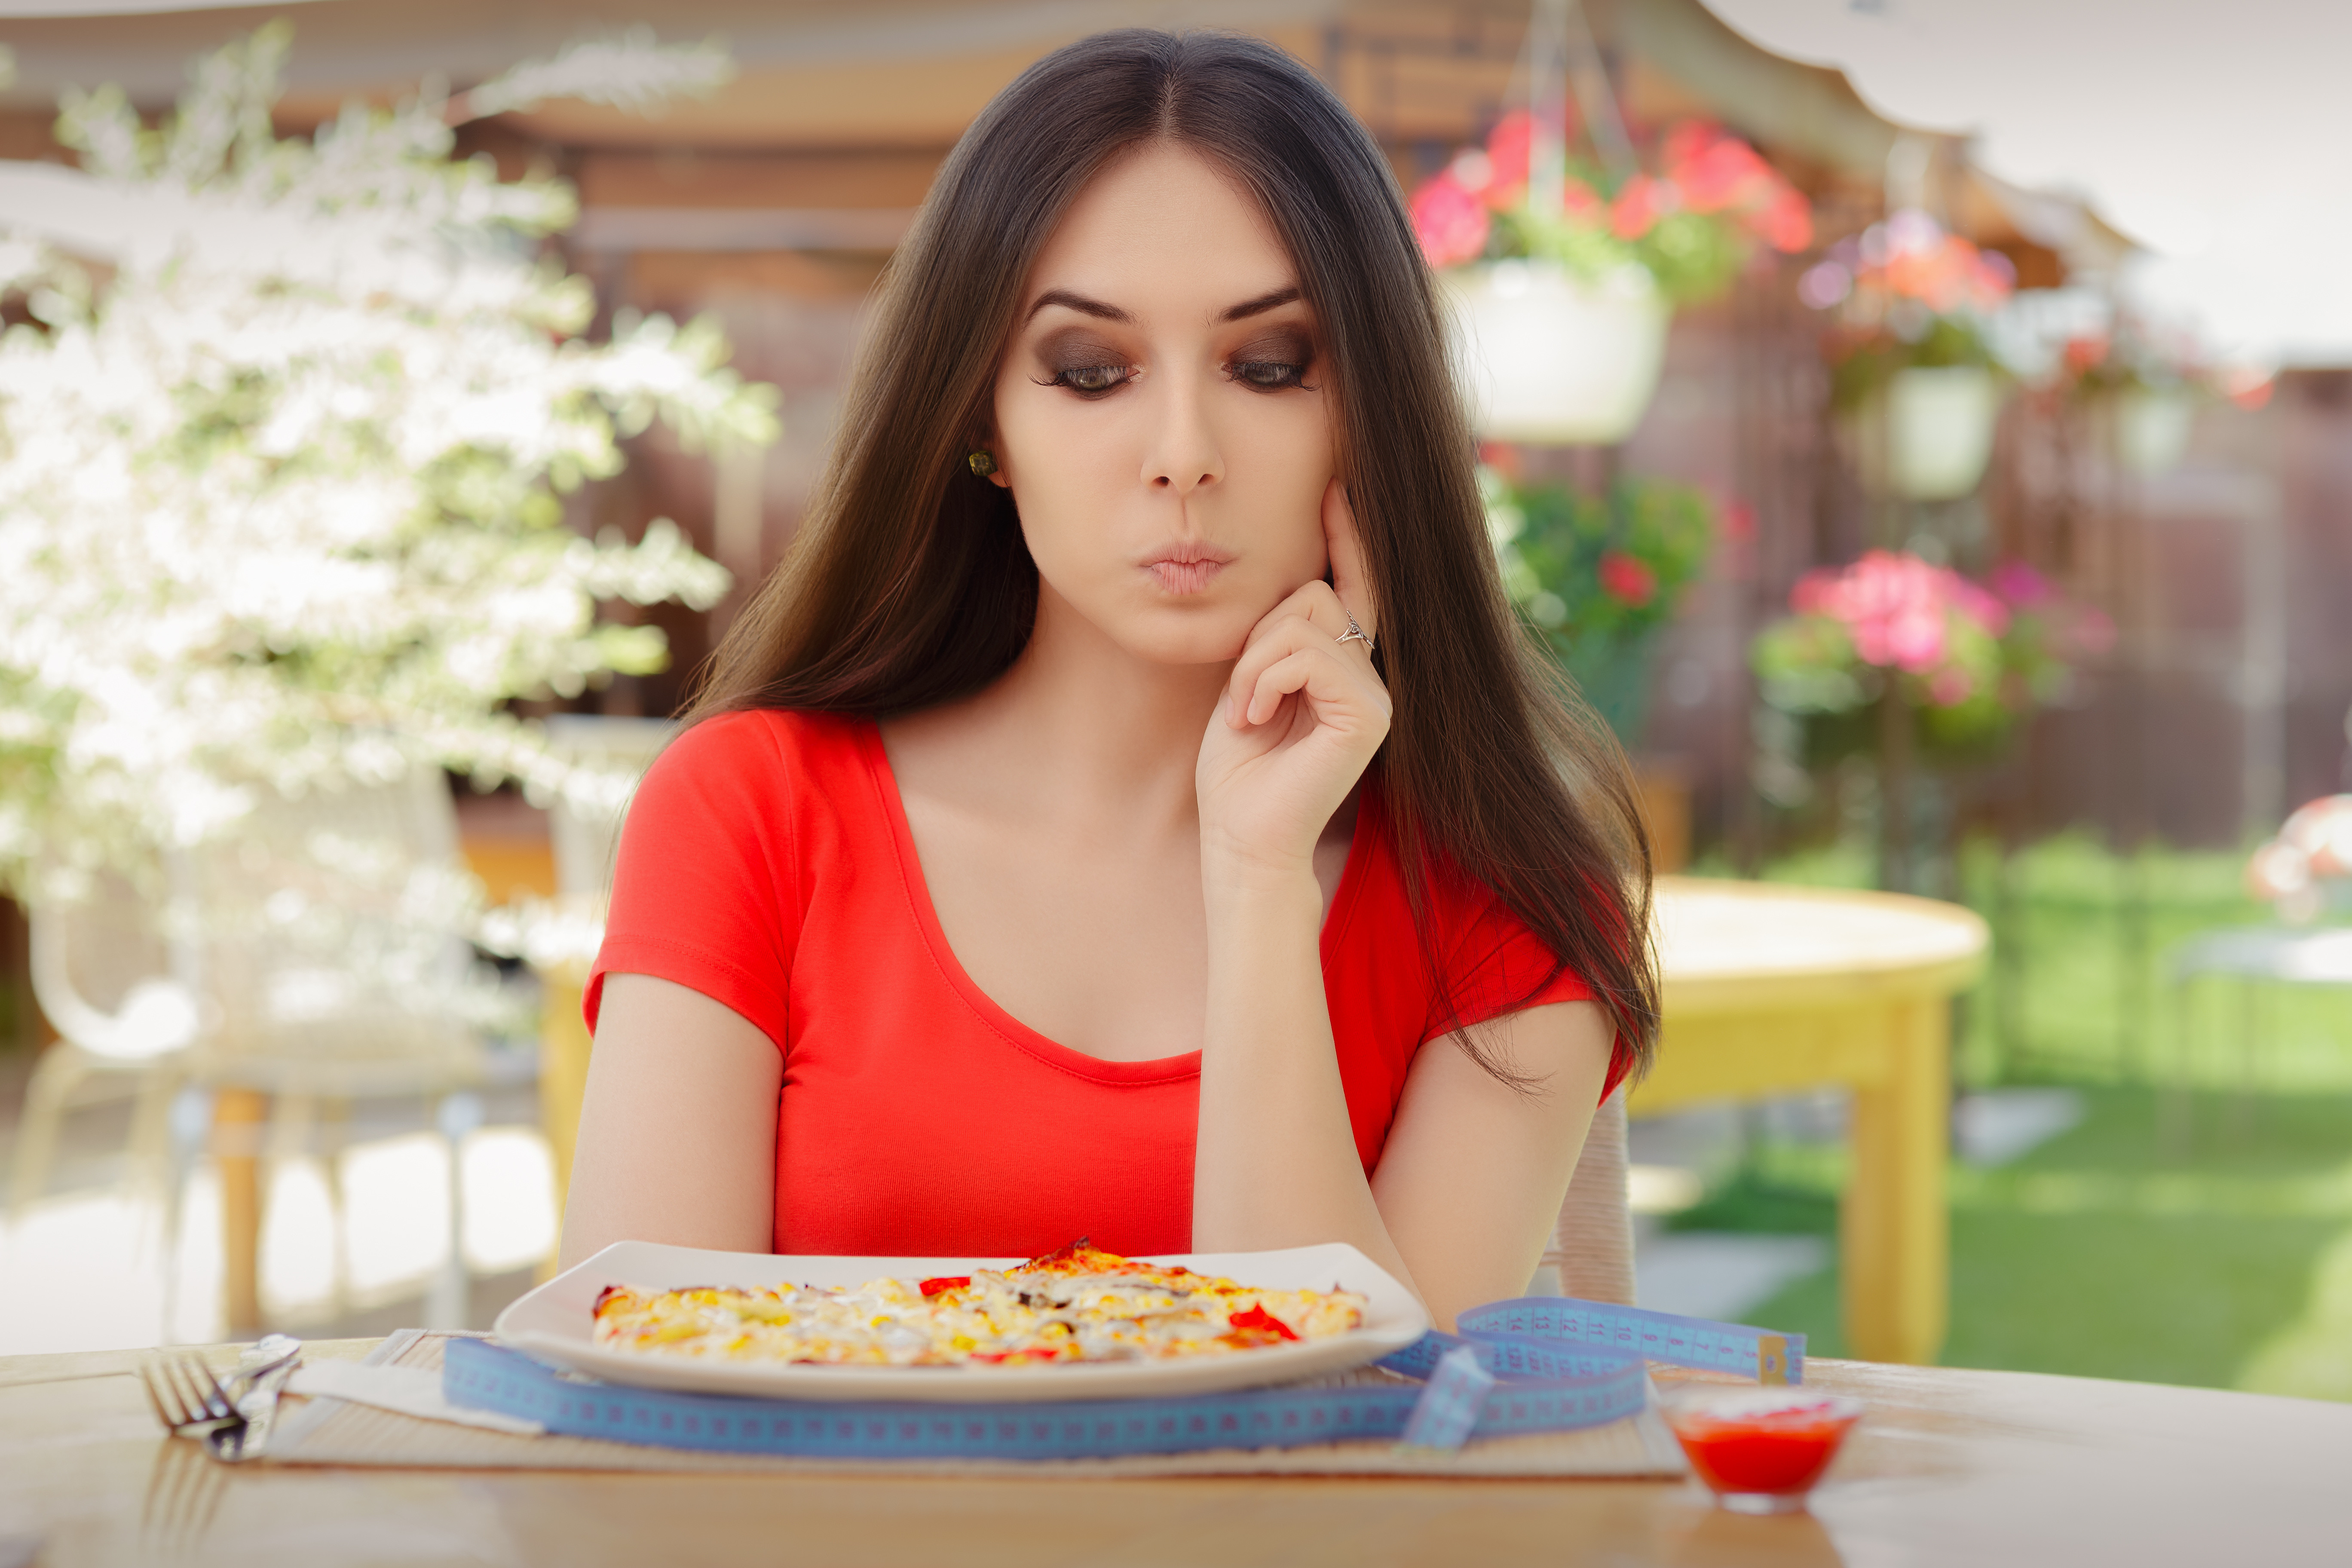 37428015 – young woman thinking about eating pizza on a diet